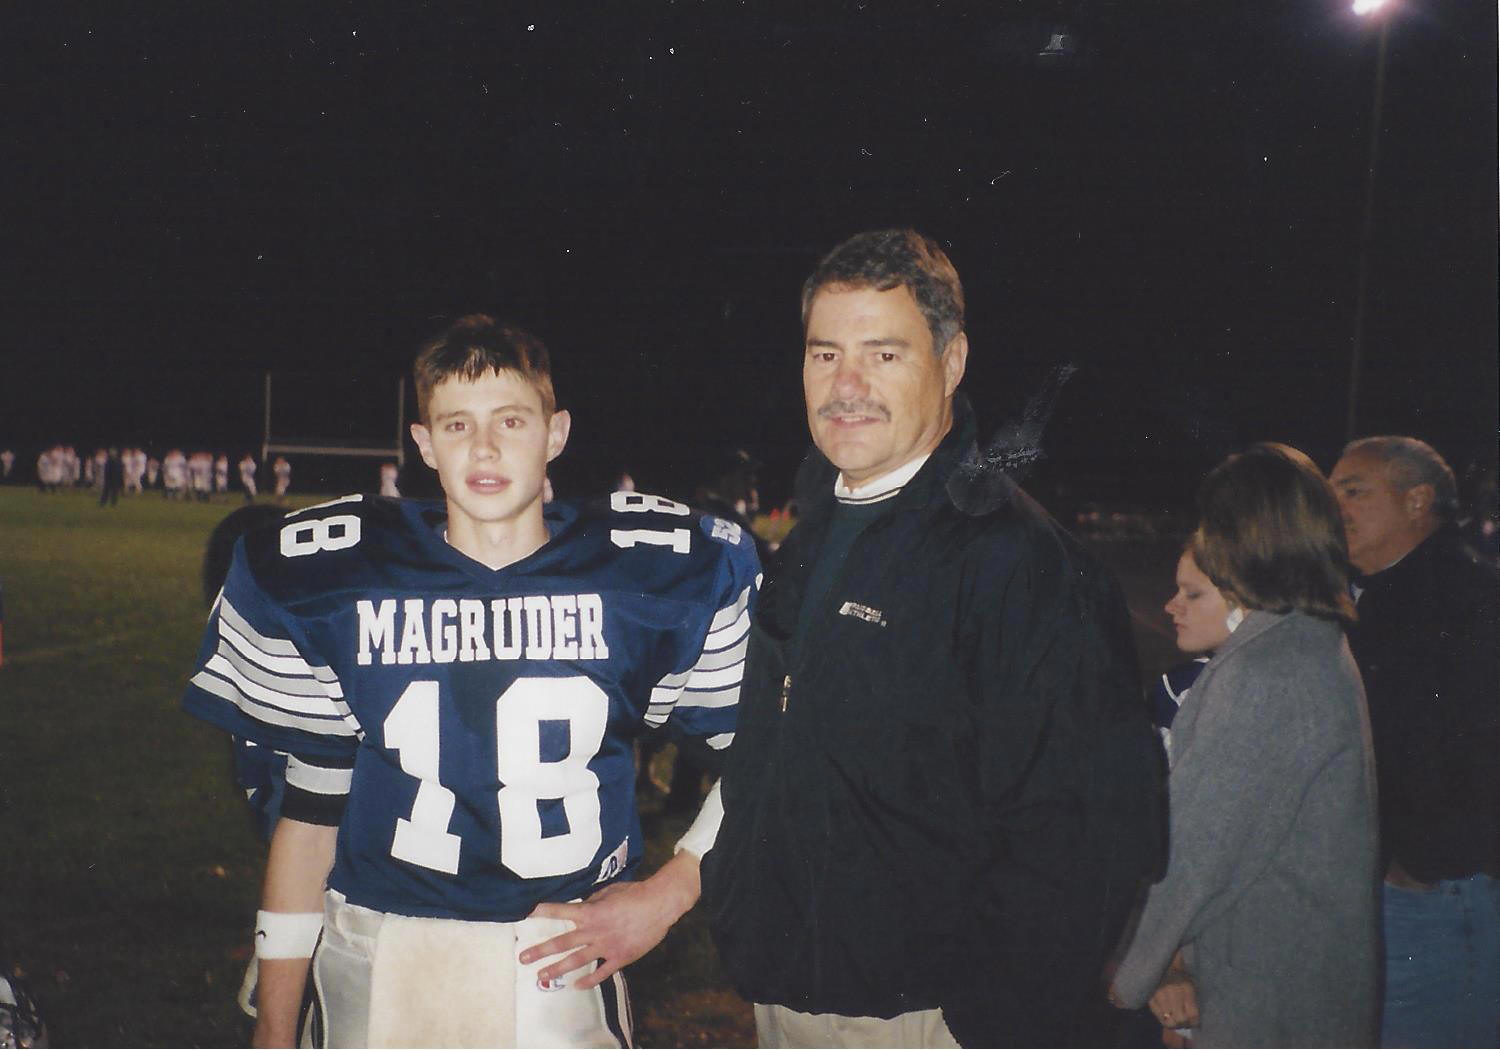 Don Wood and Donnie, senior year 1999
(Courtesy Don Wood)